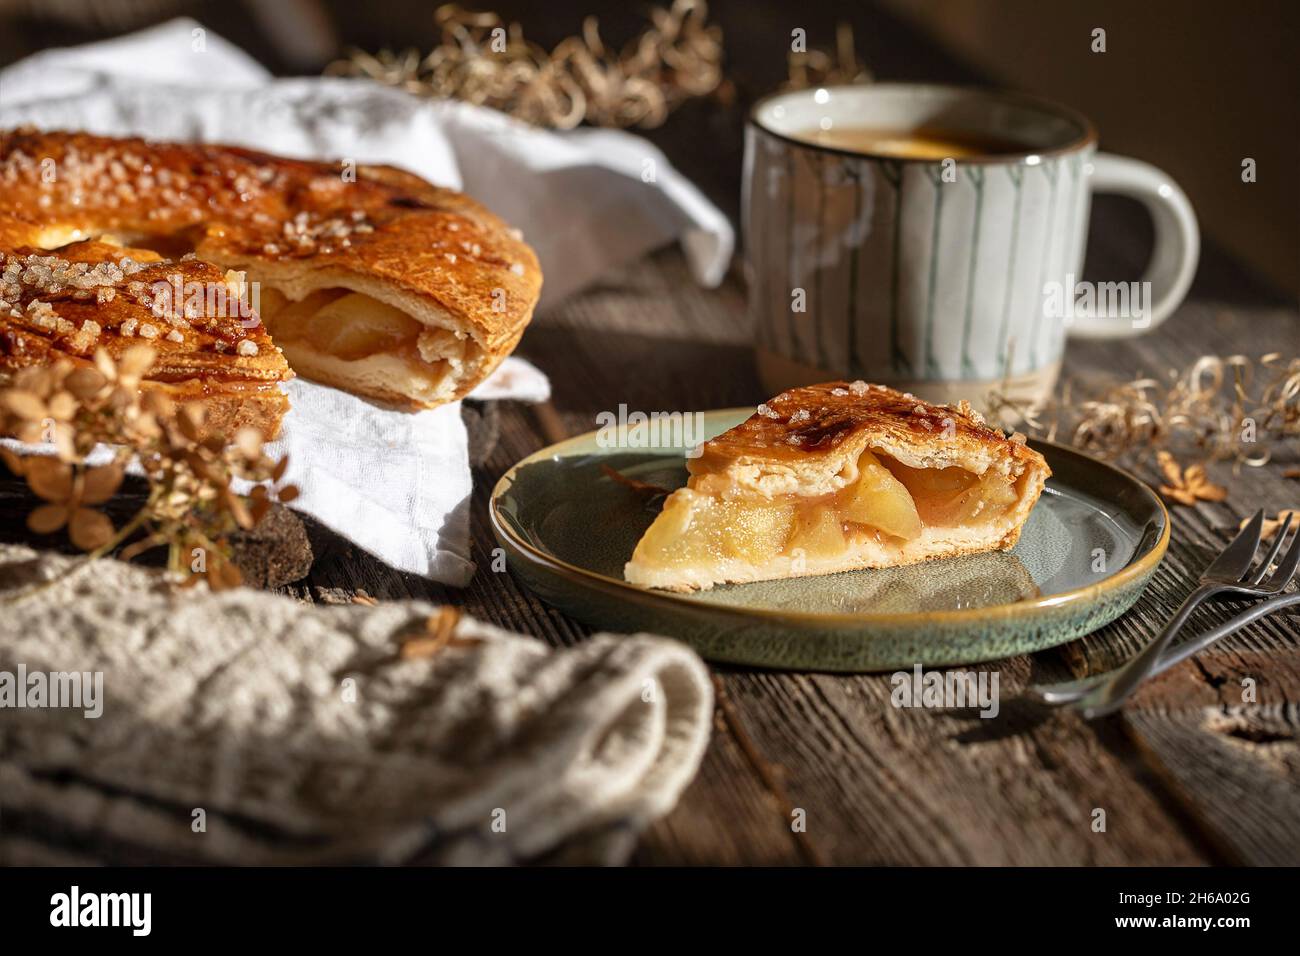 breakfast table with delicious apple pie Stock Photo